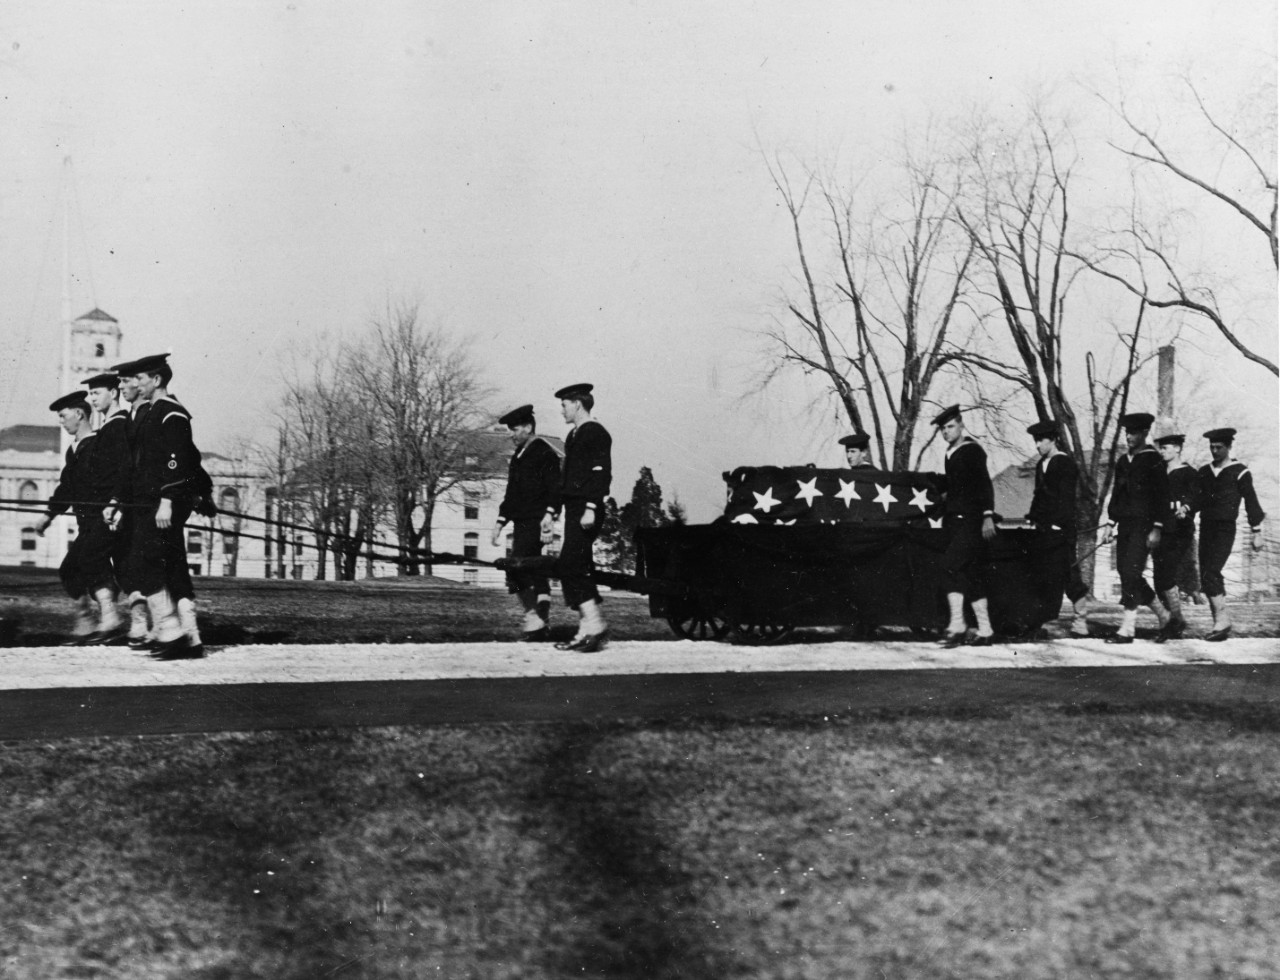 A 26 January 1913 photo by Mrs. C. R. Miller, showing the guard of honor transporting the remains of John Paul Jones to the crypt of the Chapel of the Naval Academy on the Naval Academy grounds.